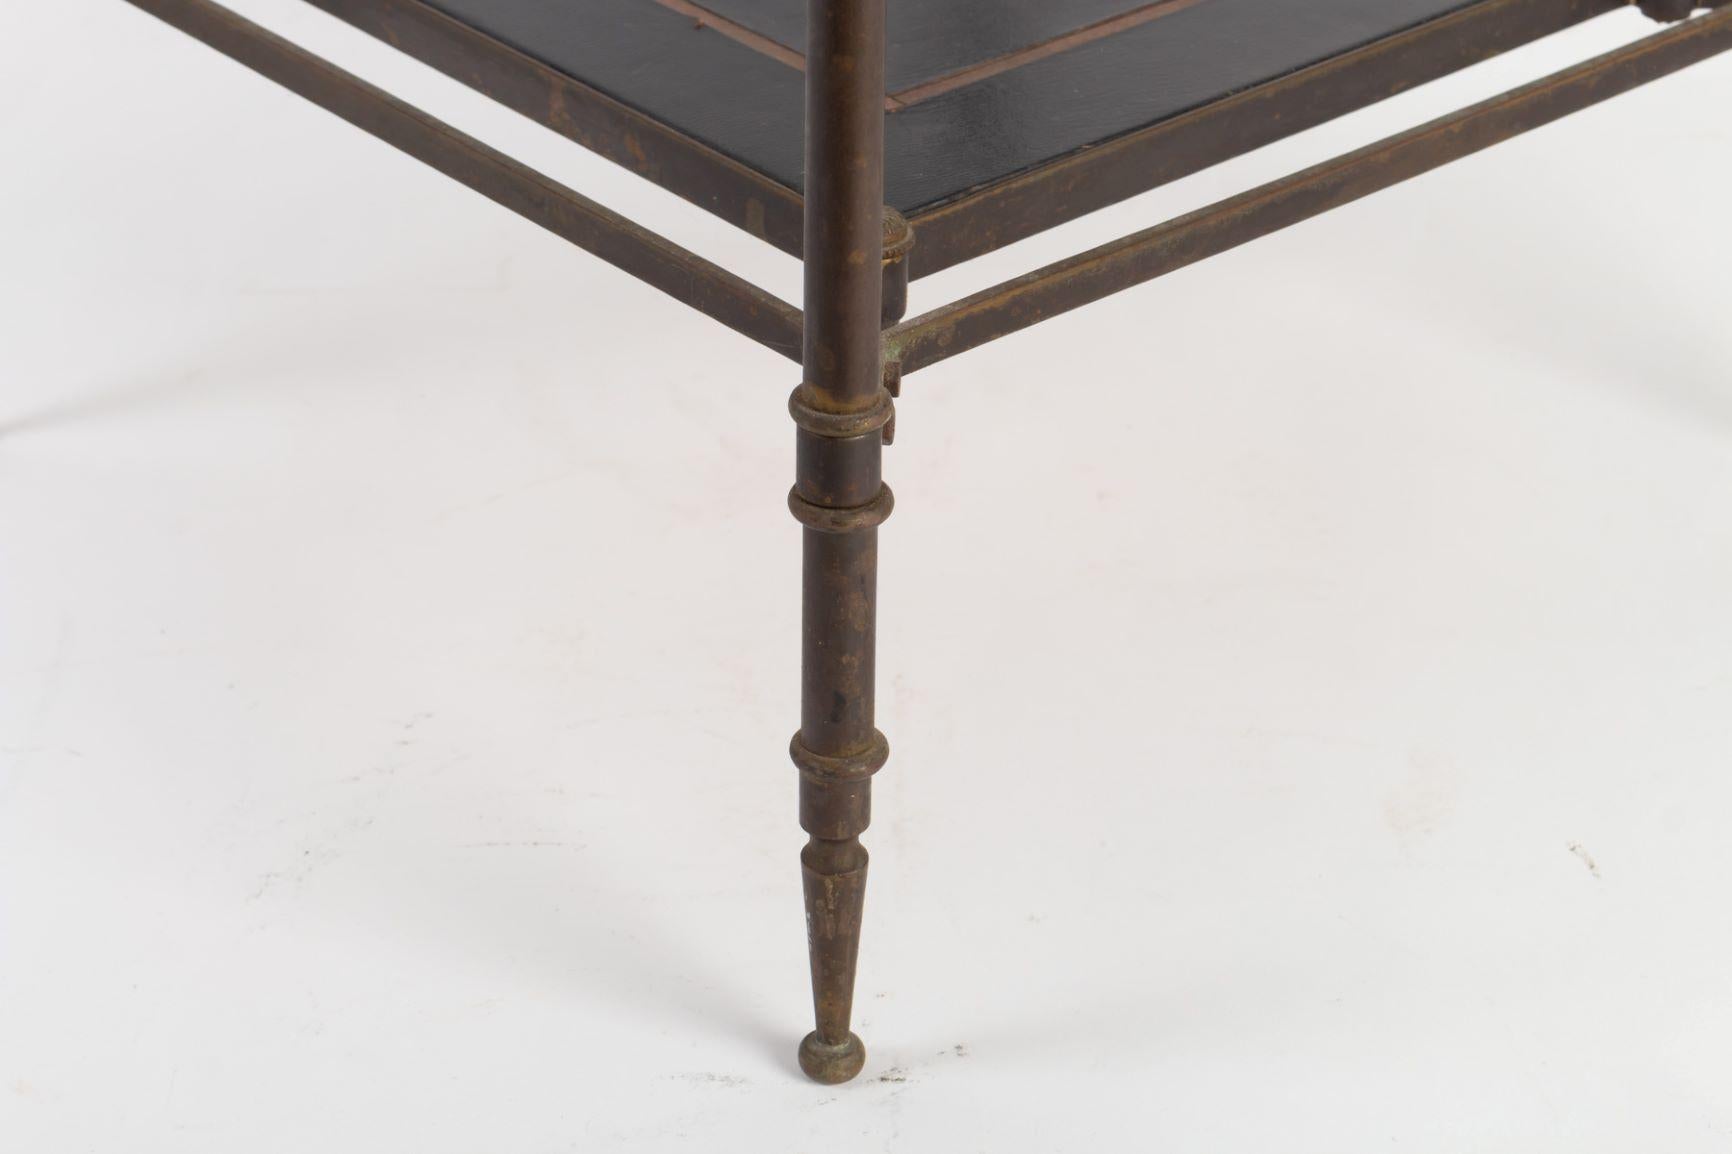 French Elegant Pair of Small Square Side Tables Attributed to Maison Jansen 1940s-1950s For Sale